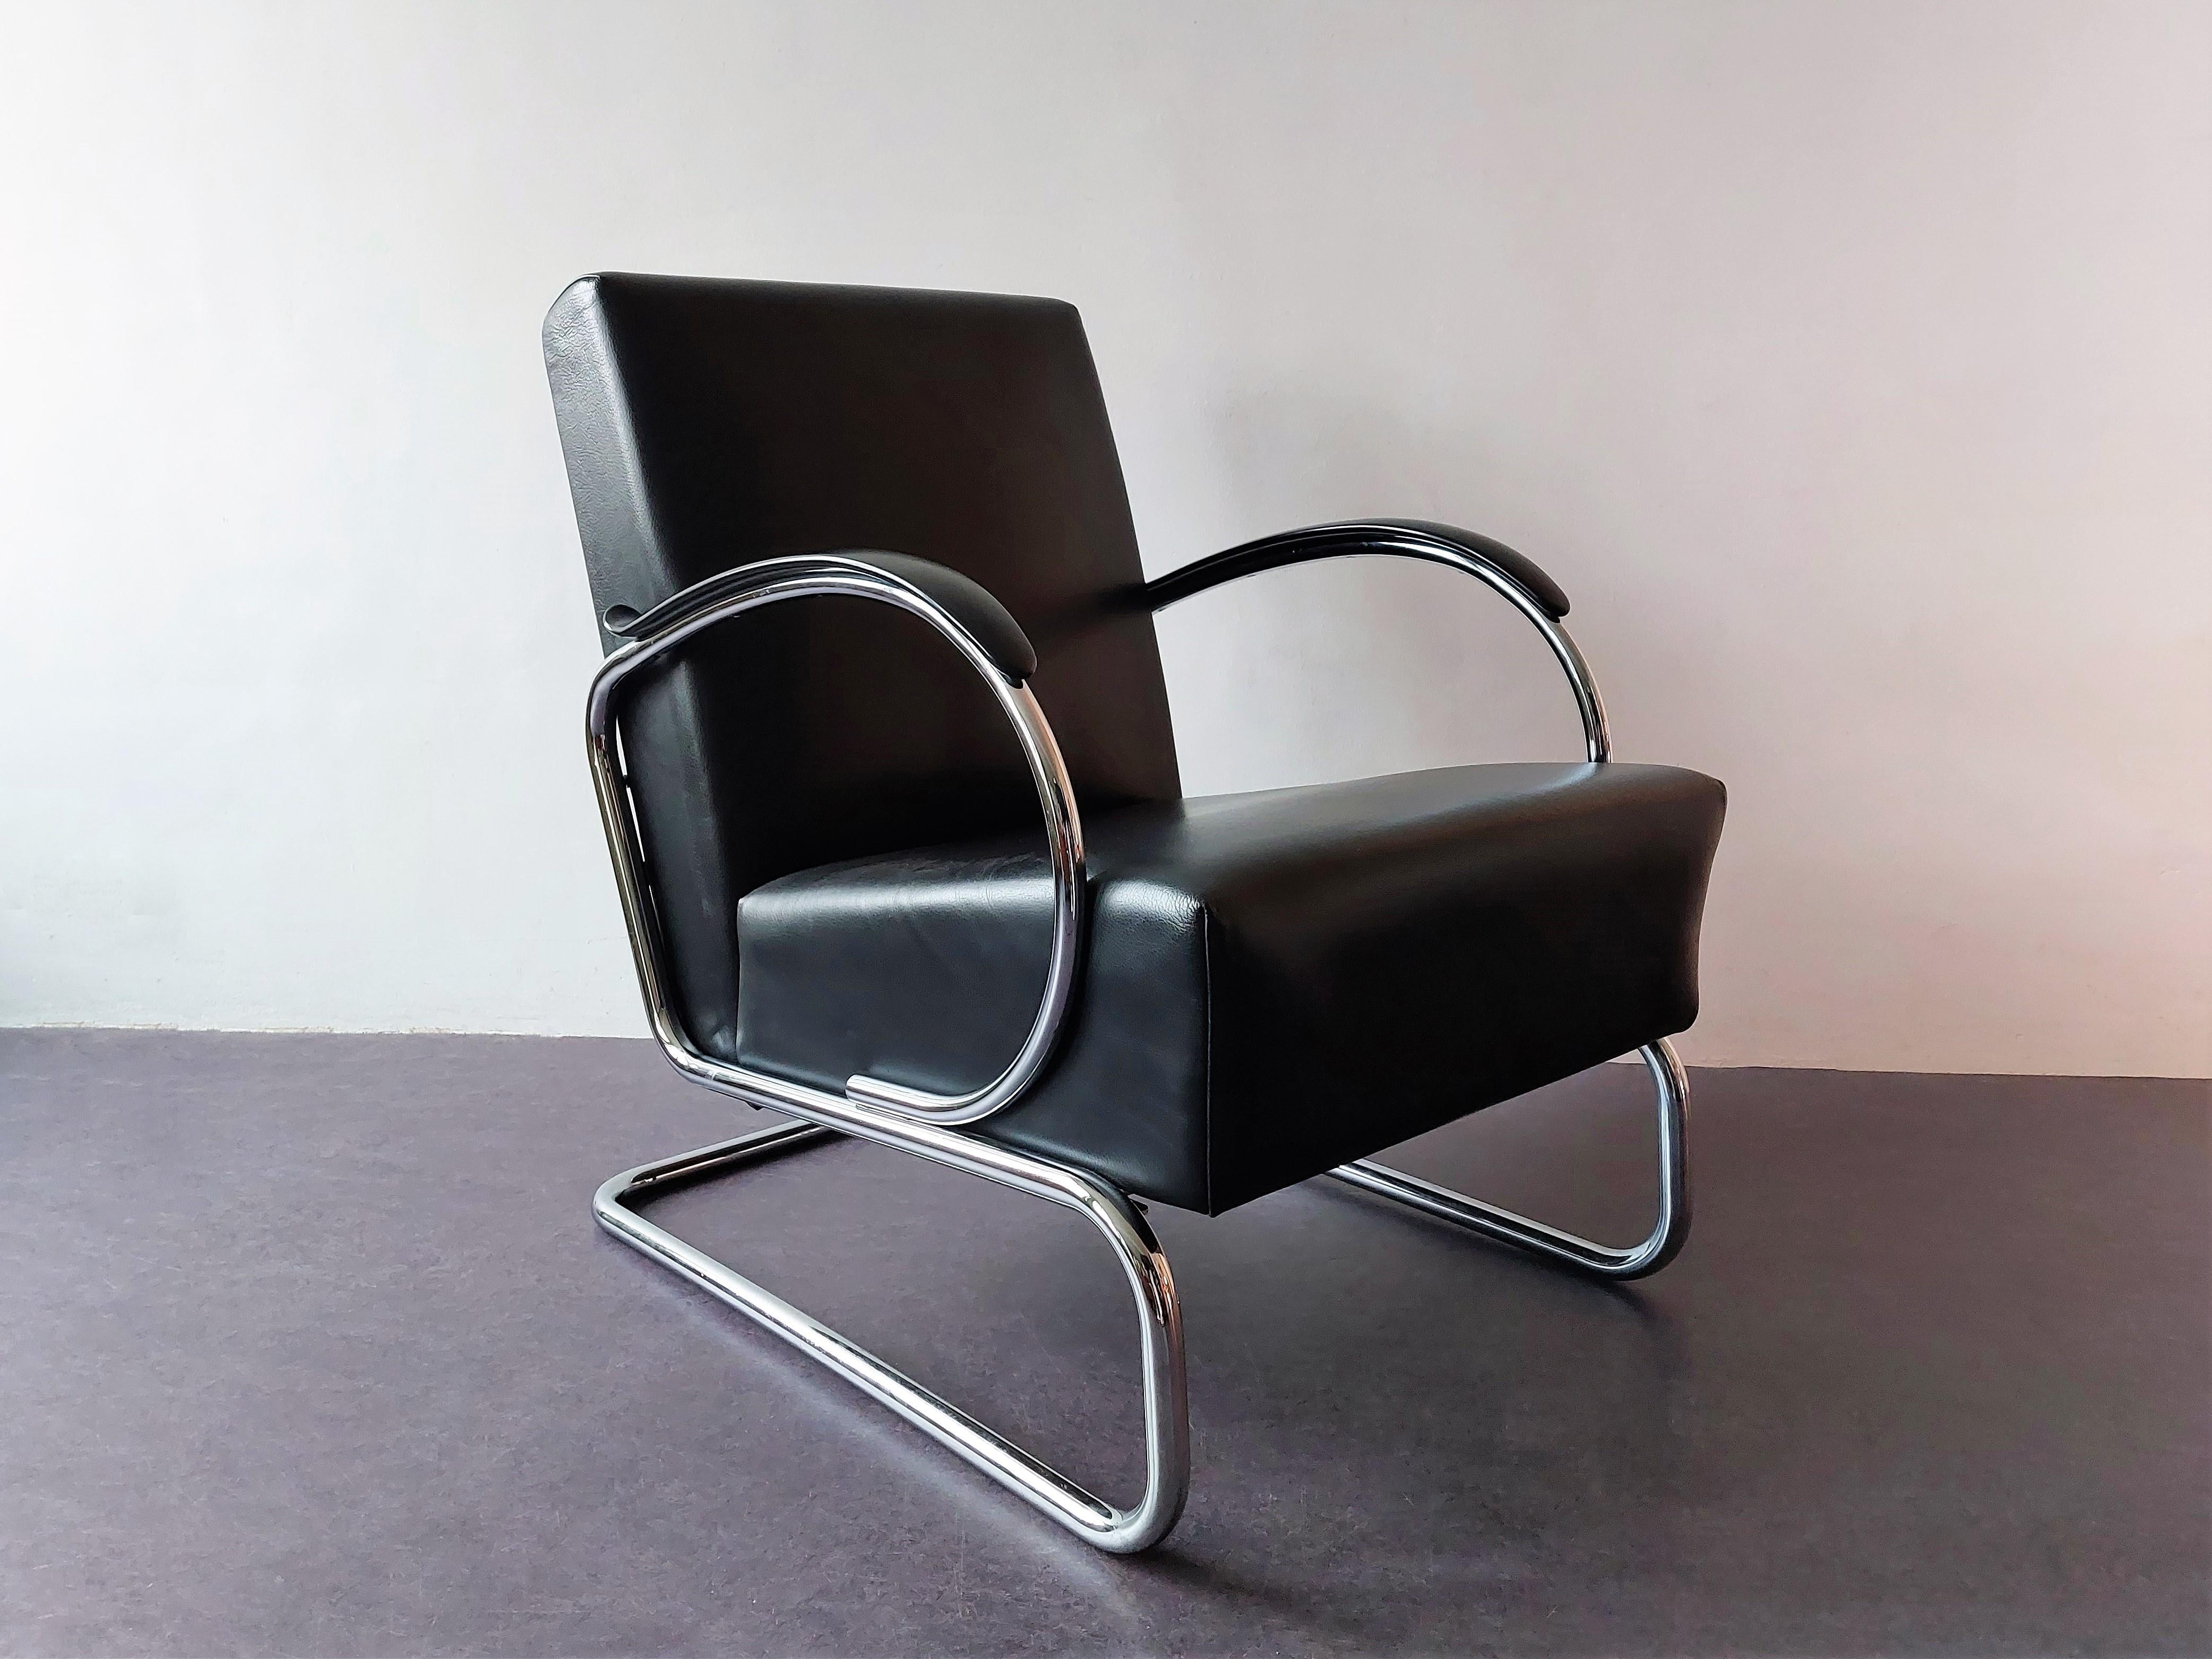 The classic model 407 chair was designed by Wilhelm Hendrik Gispen in 1931. This particular chair was made by Dutch Originals who produces some Gispen Classics. It has a black leather seat, with an additional small black leather cushion. The frame